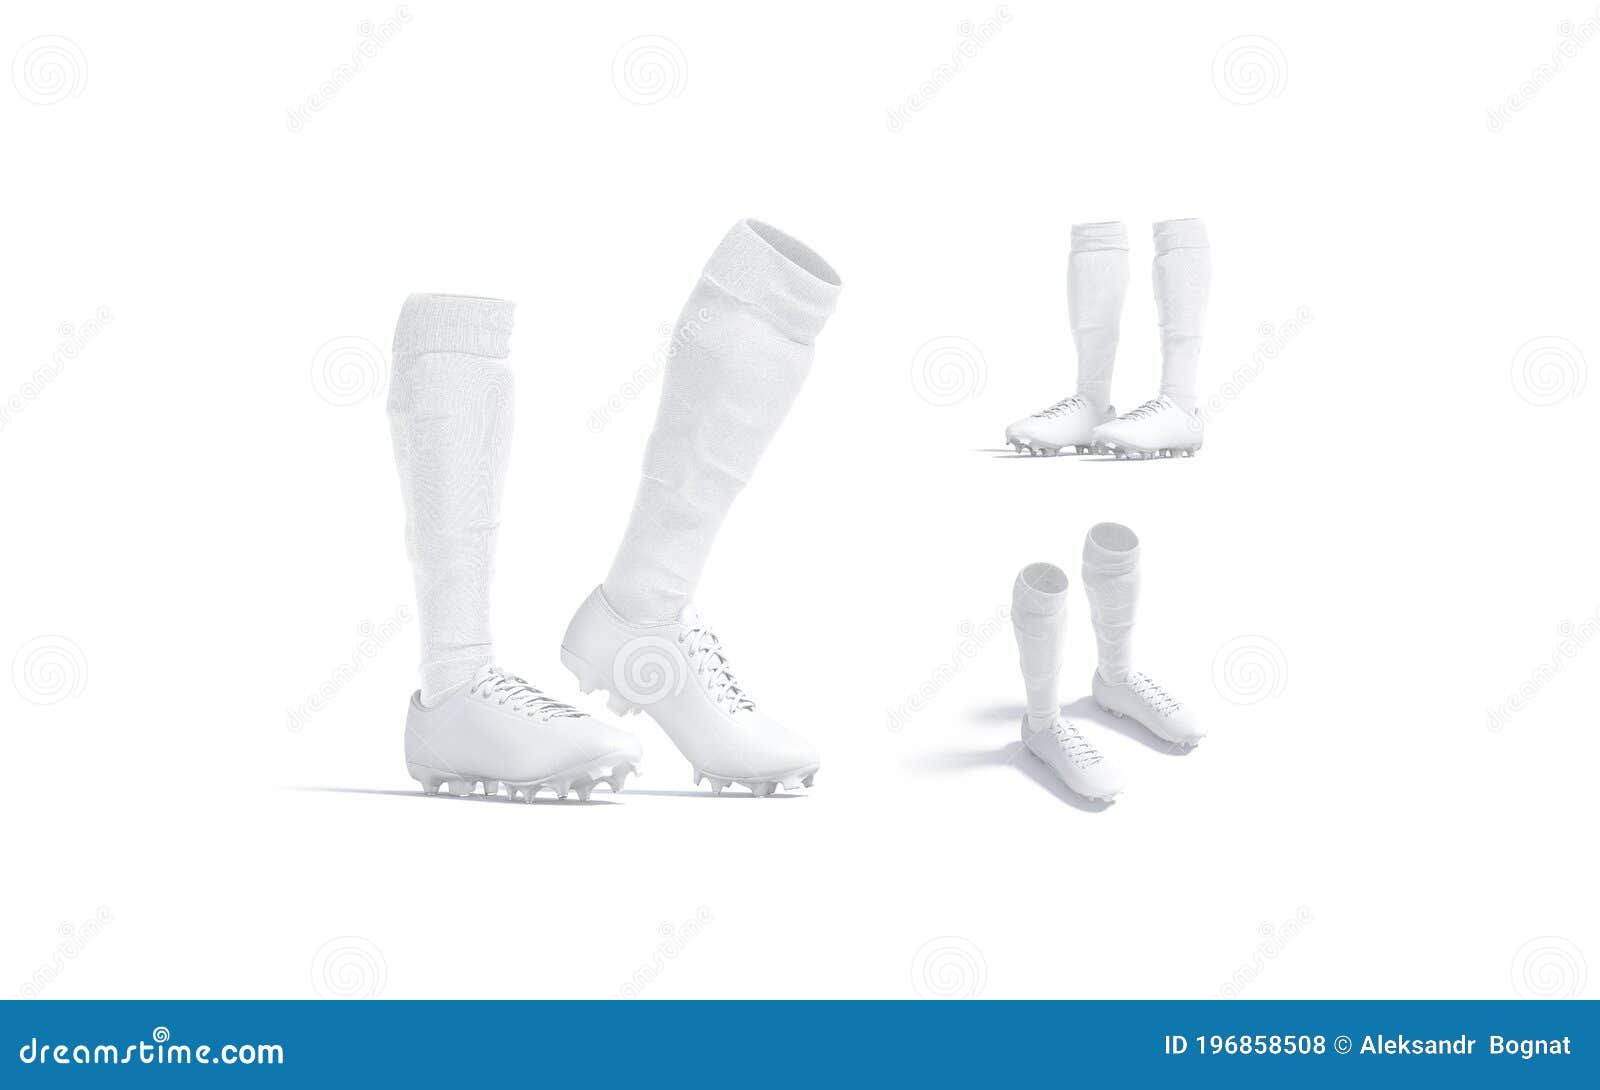 blank white soccer boots with socks mockup, different views